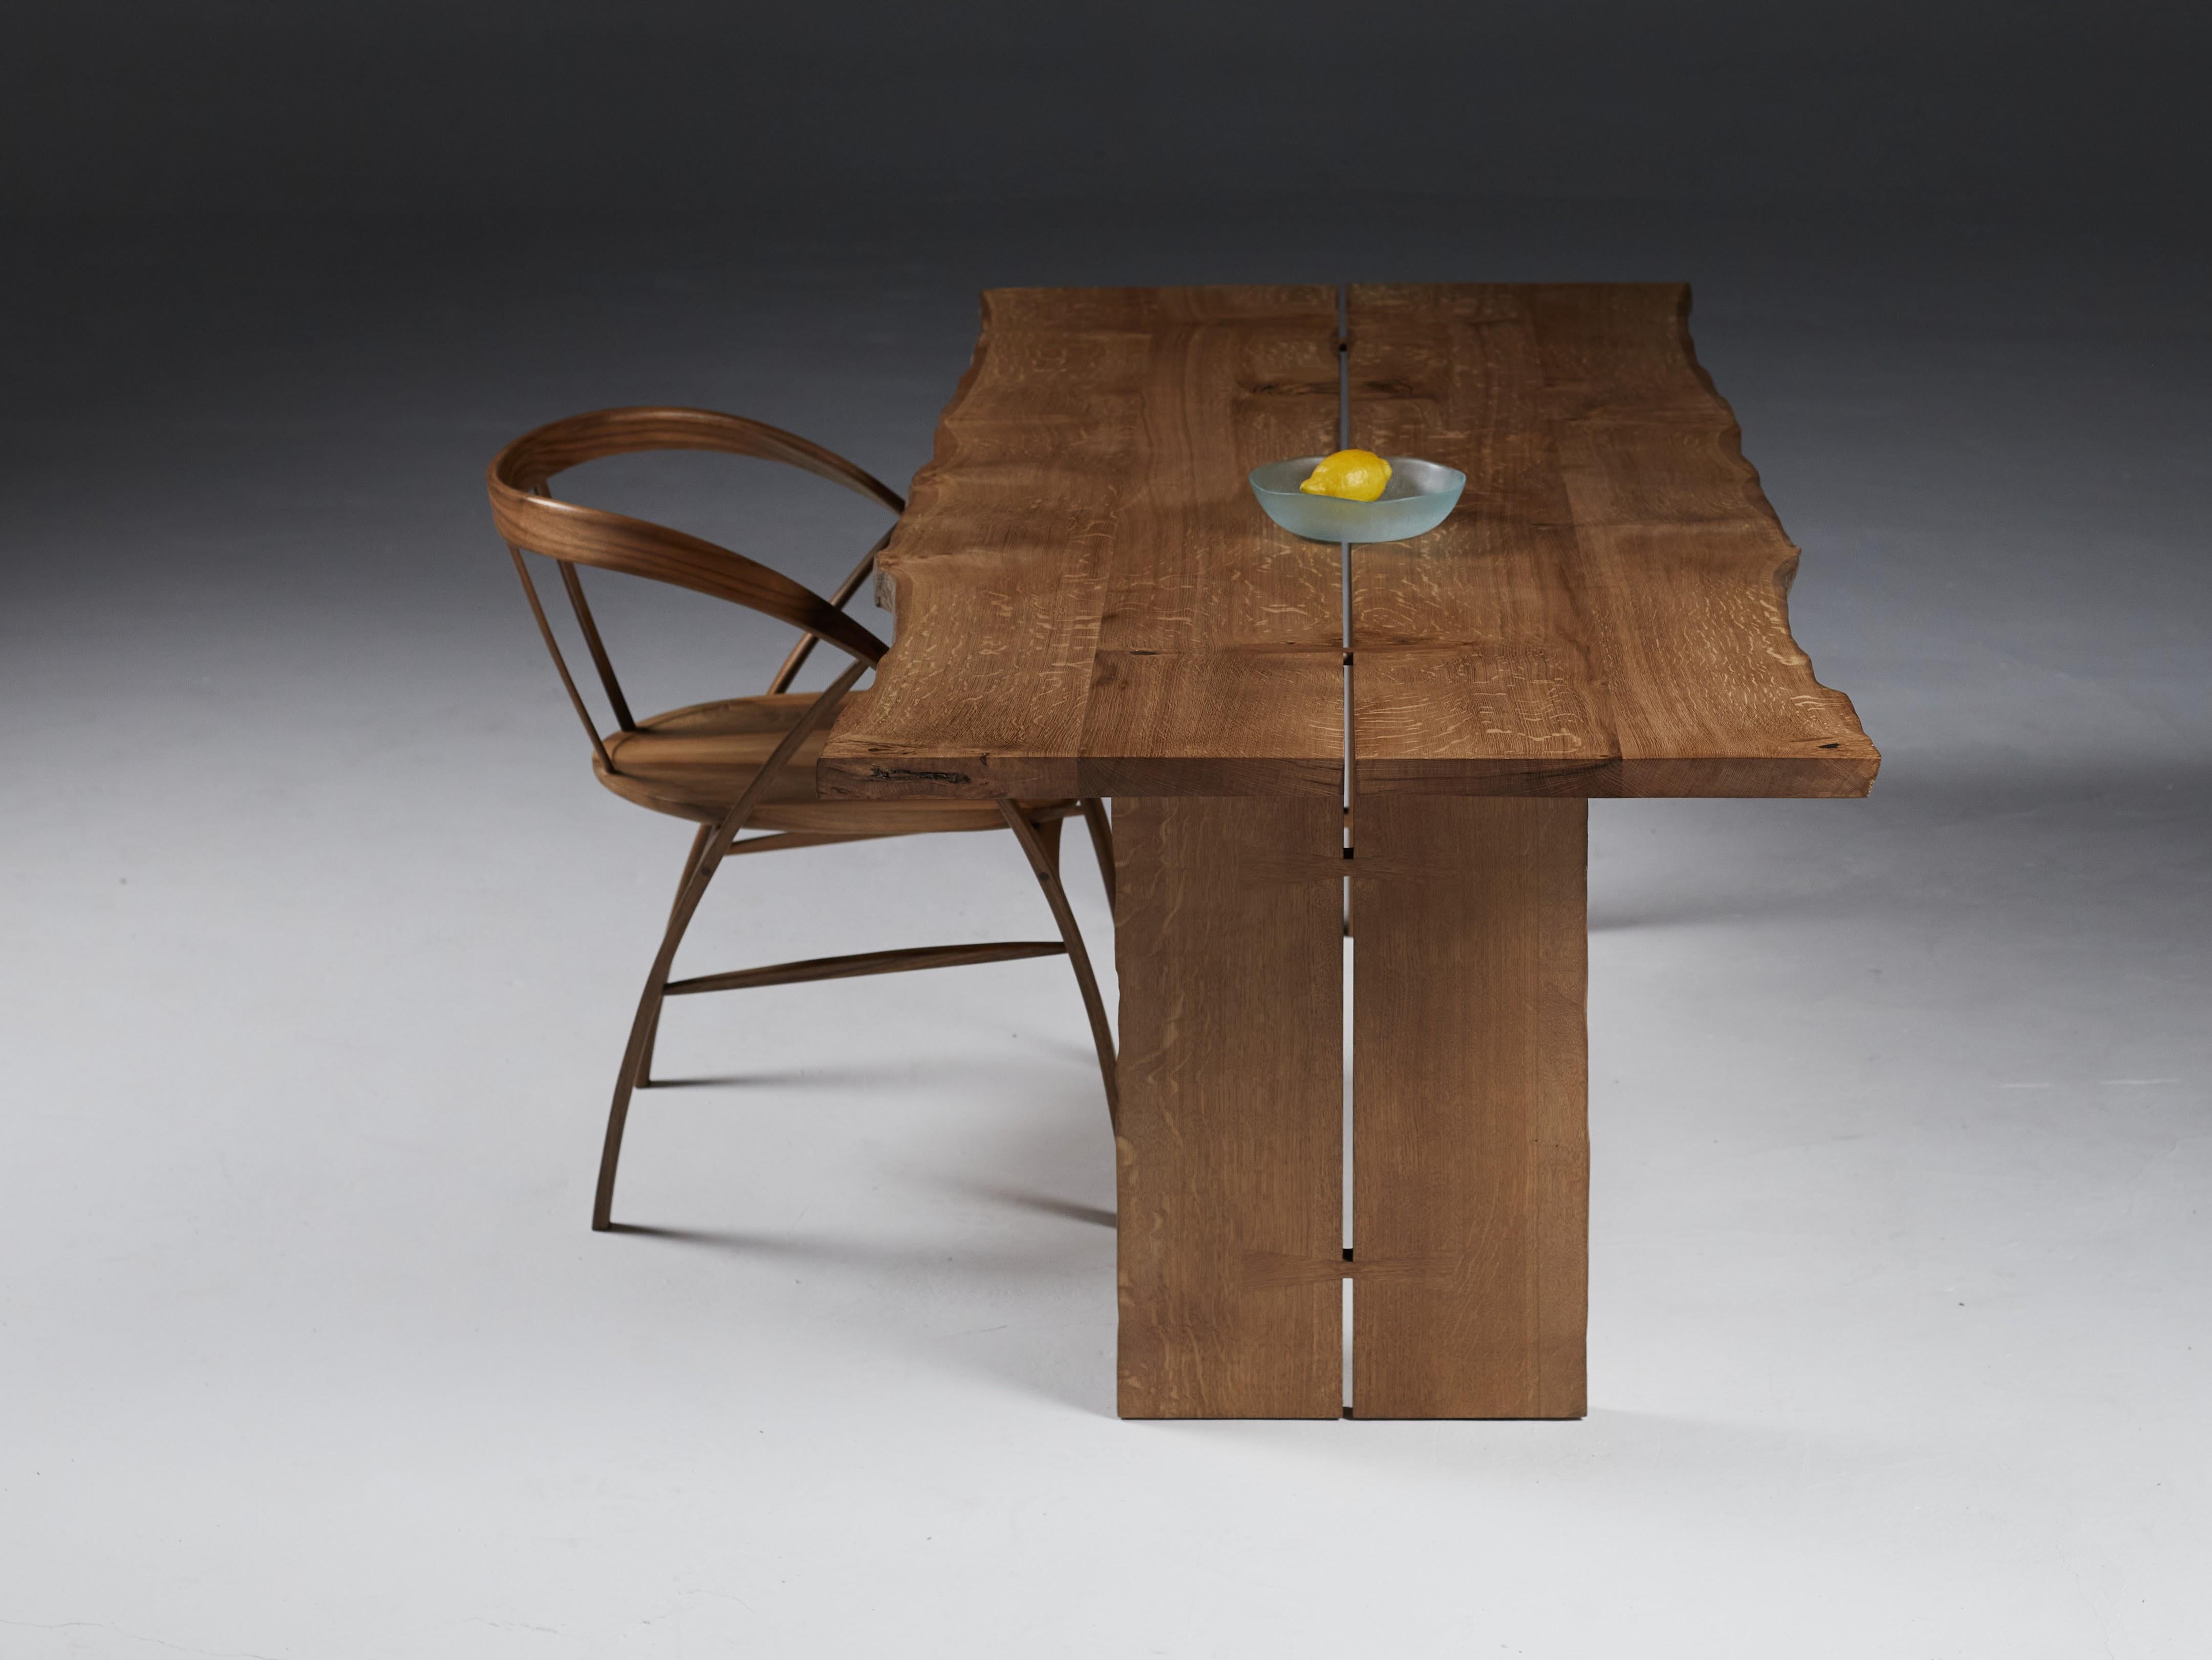 The 'Additions' butterfly joined table with a book-matched live-edge solid English Oak top and legs.

There are two sizes to choose from - 

200 cm x 90 cm x 75 cm // 78.75” x 35.5” x 29.5” H

220 cm x 100 cm x 75 cm H // 86.5” x 39.3” x 29.5” H